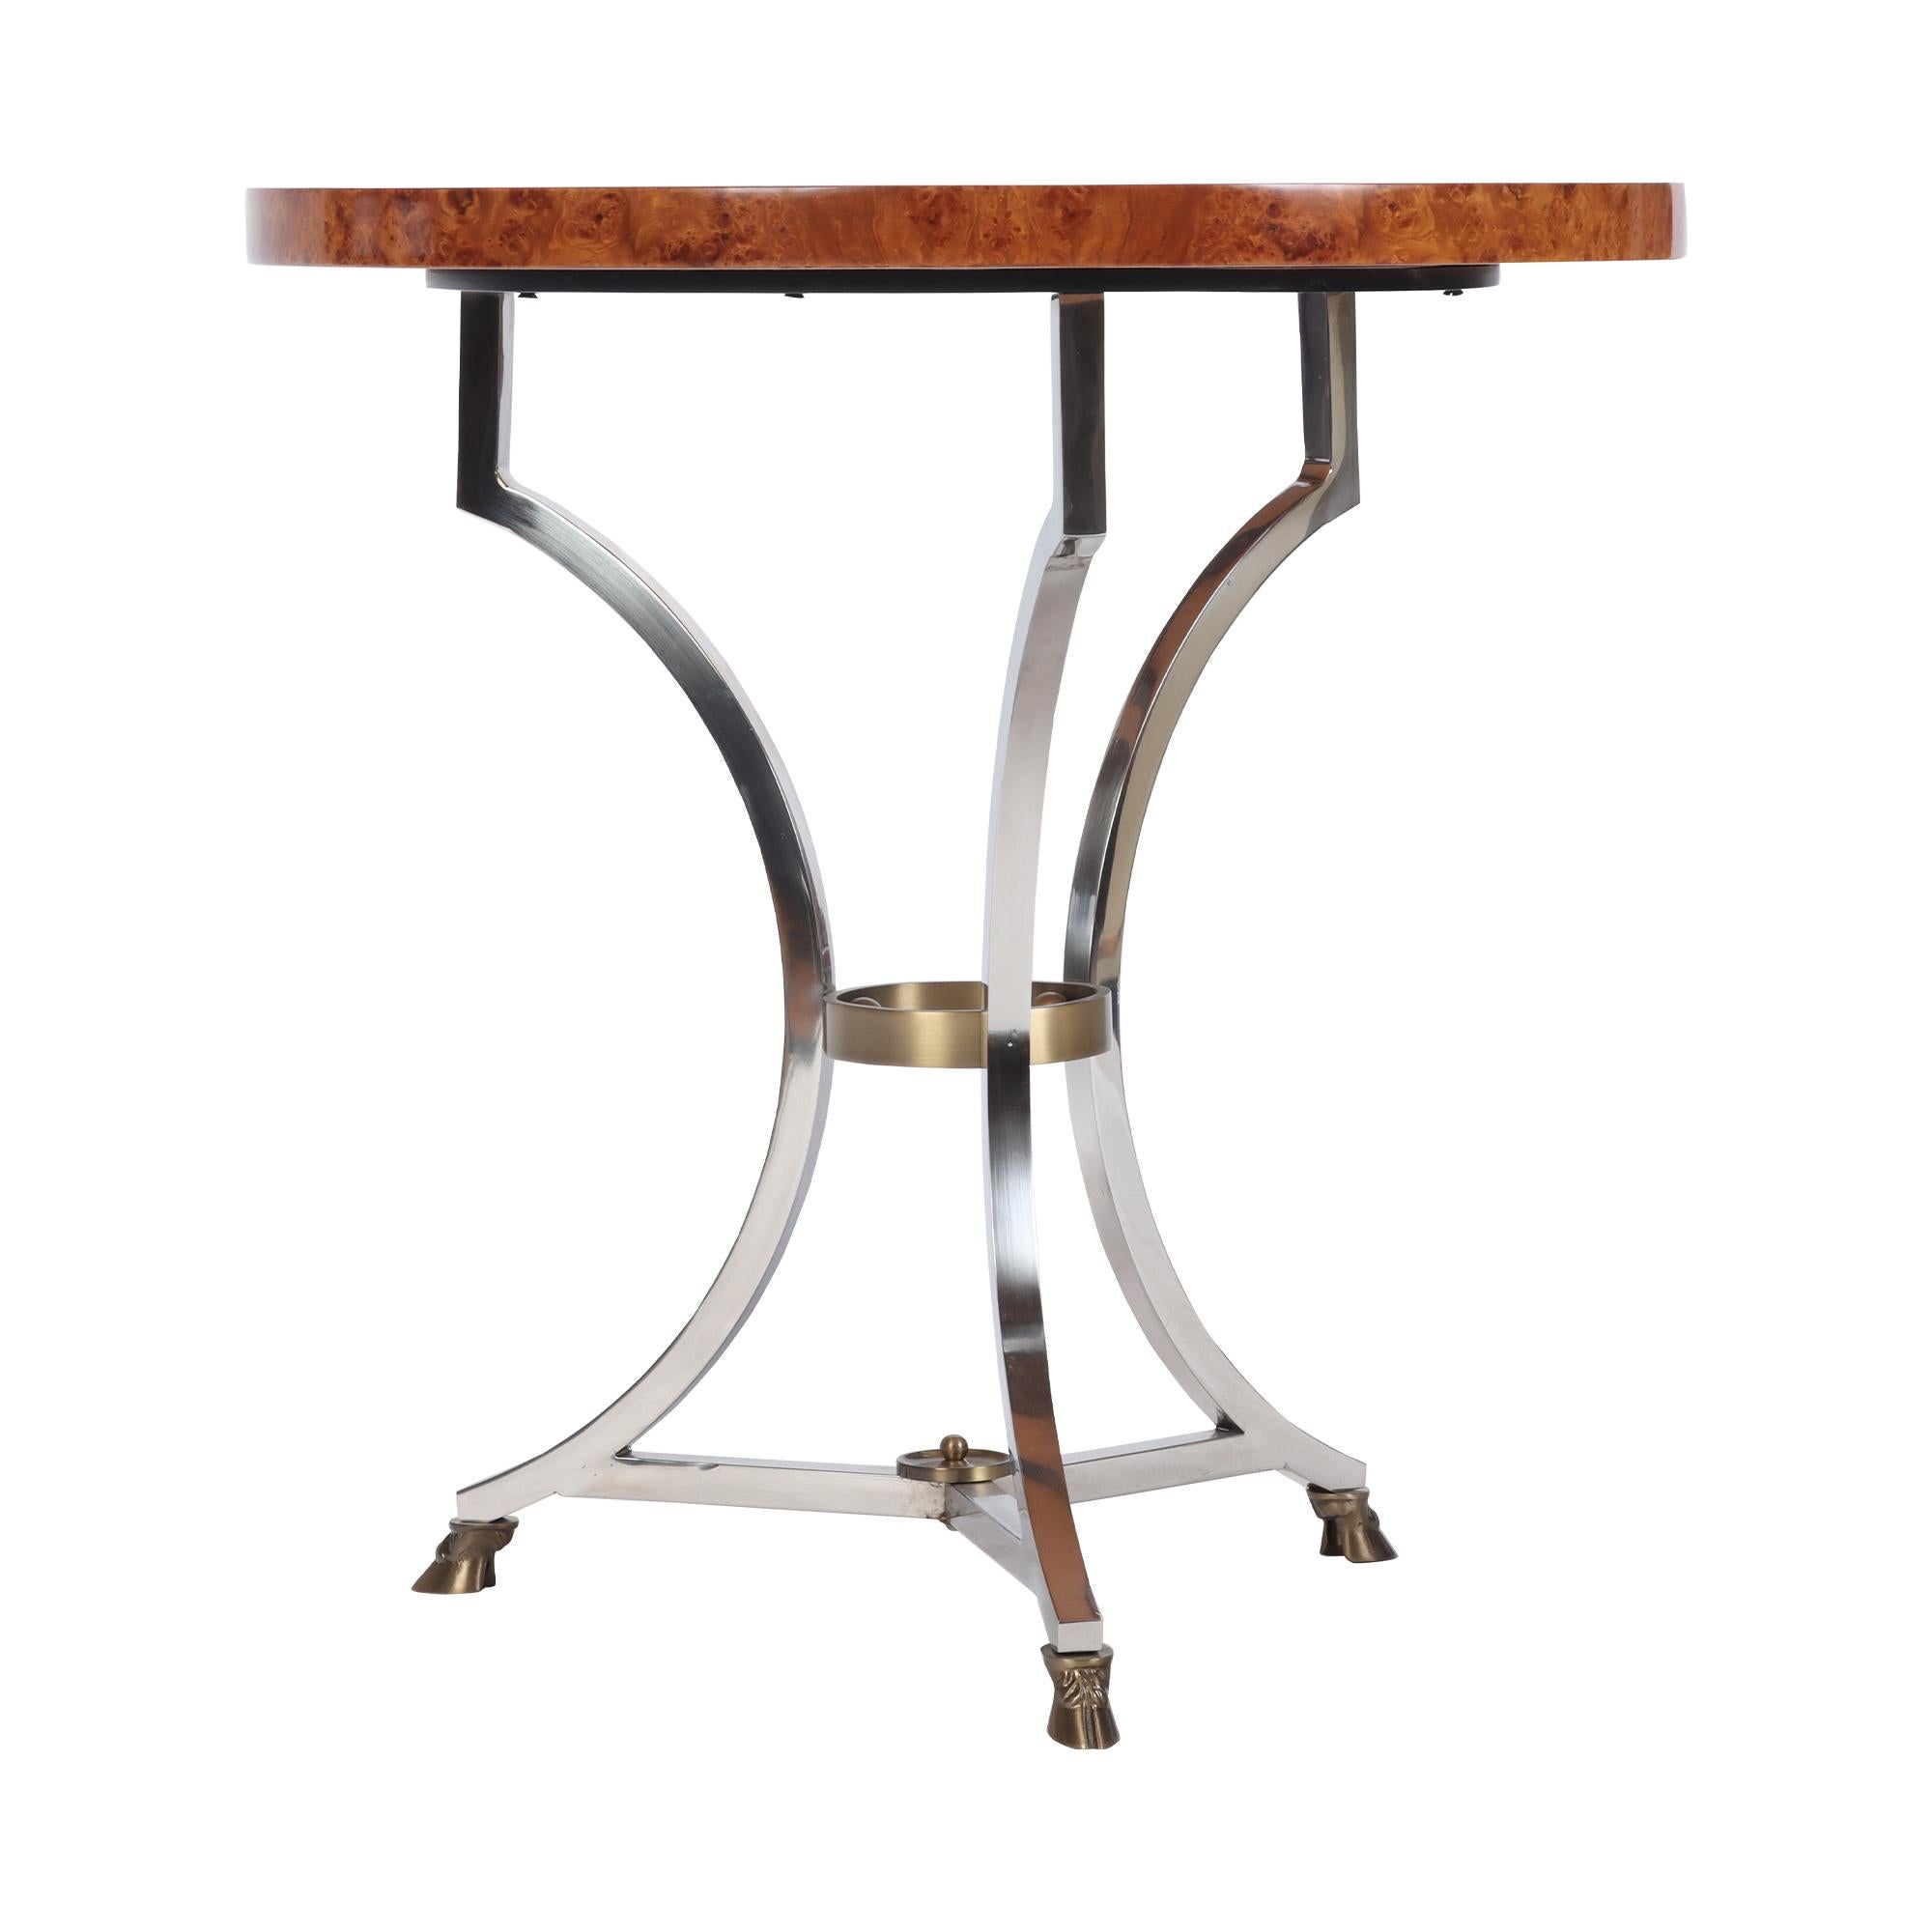 An elegant French Neoclassical inspired Gueridon or occasional table. Burl wood top with a brass and mix metal base. Circa 1950.